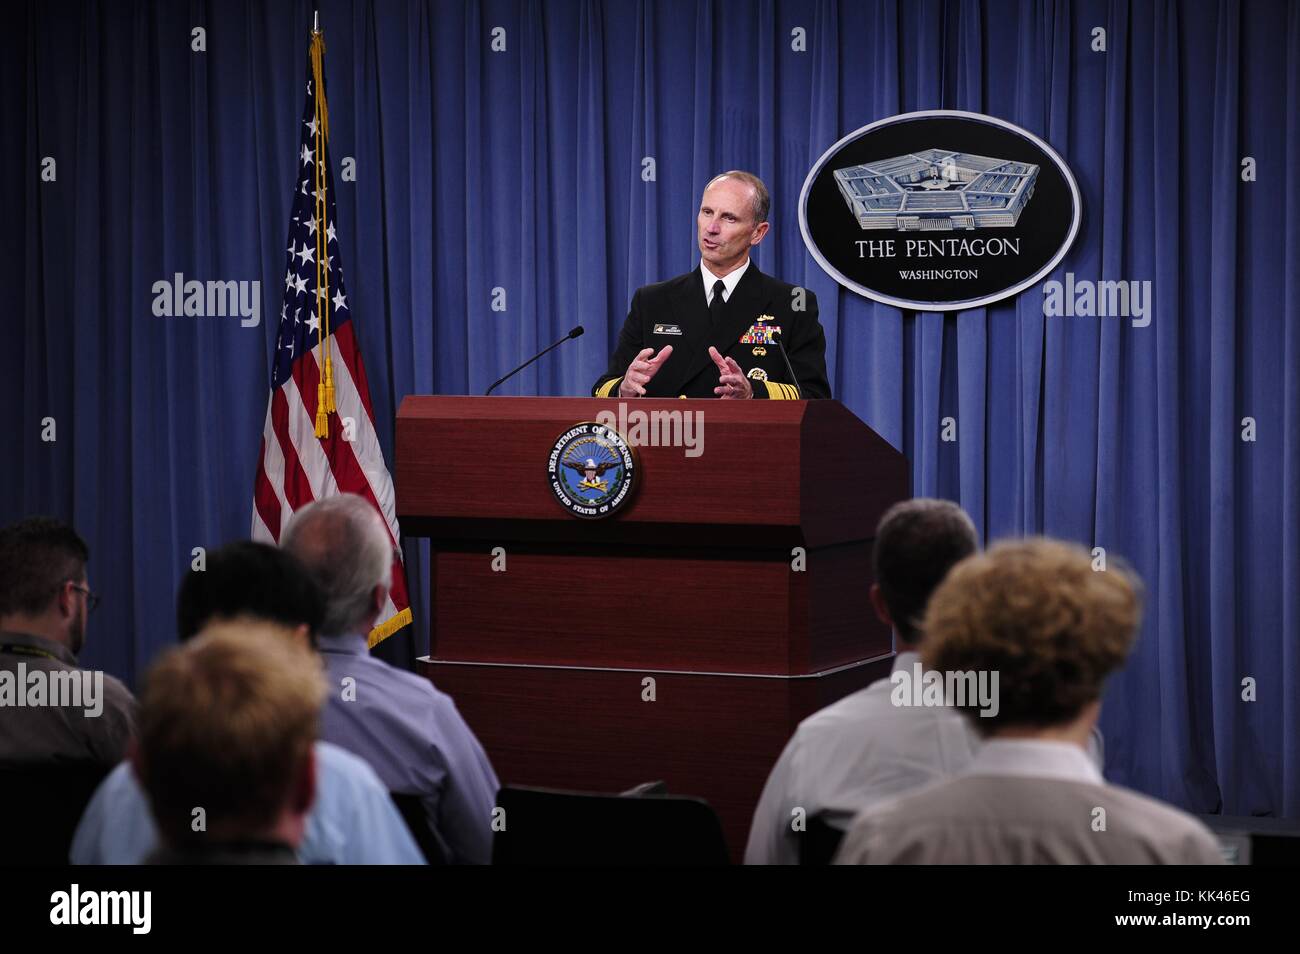 Chief of Naval Operations CNO Admiral Jonathan Greenert holds a press conference to give the public an update on the status of Navy, Washington, 2012. Image courtesy Mass Communication Specialist 1st Class Peter D. Lawlor/US Navy. Stock Photo